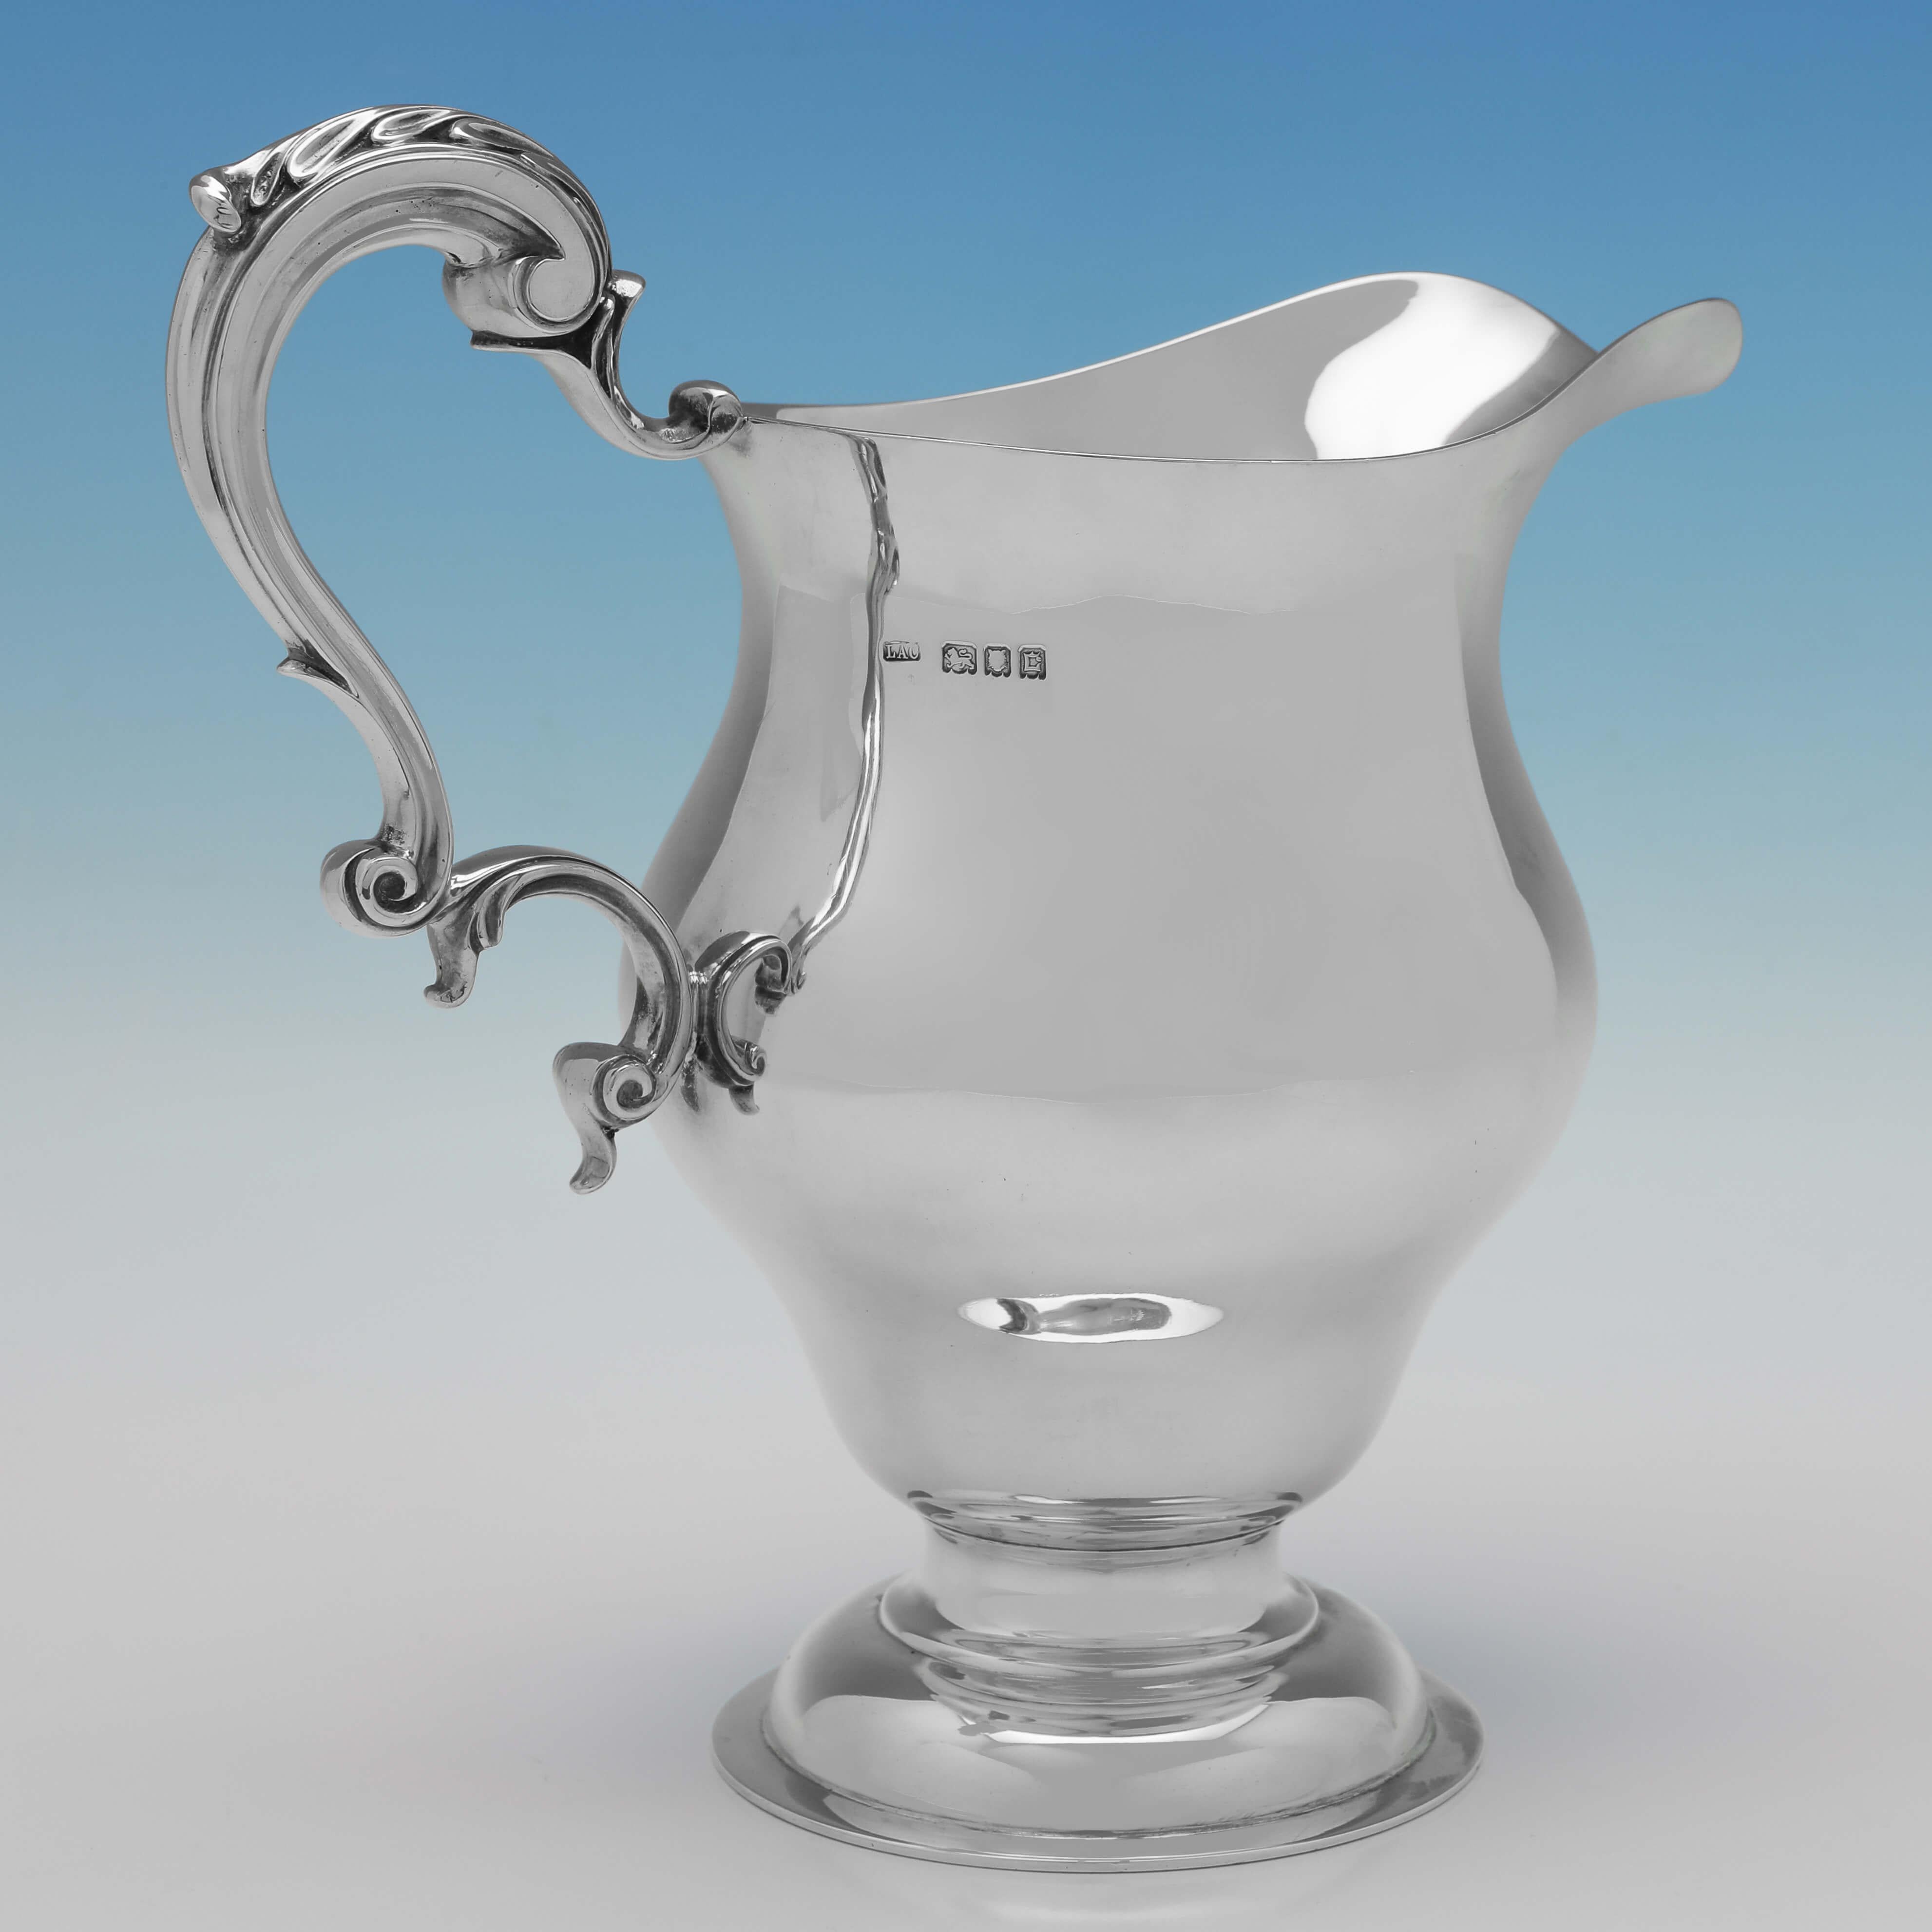 Hallmarked in London in 1918 by L. A. Crichton, this handsome, Antique Sterling Silver Water Jug, is plain in style and features an acanthus detailed scroll handle. 

The water jug measures 9.25